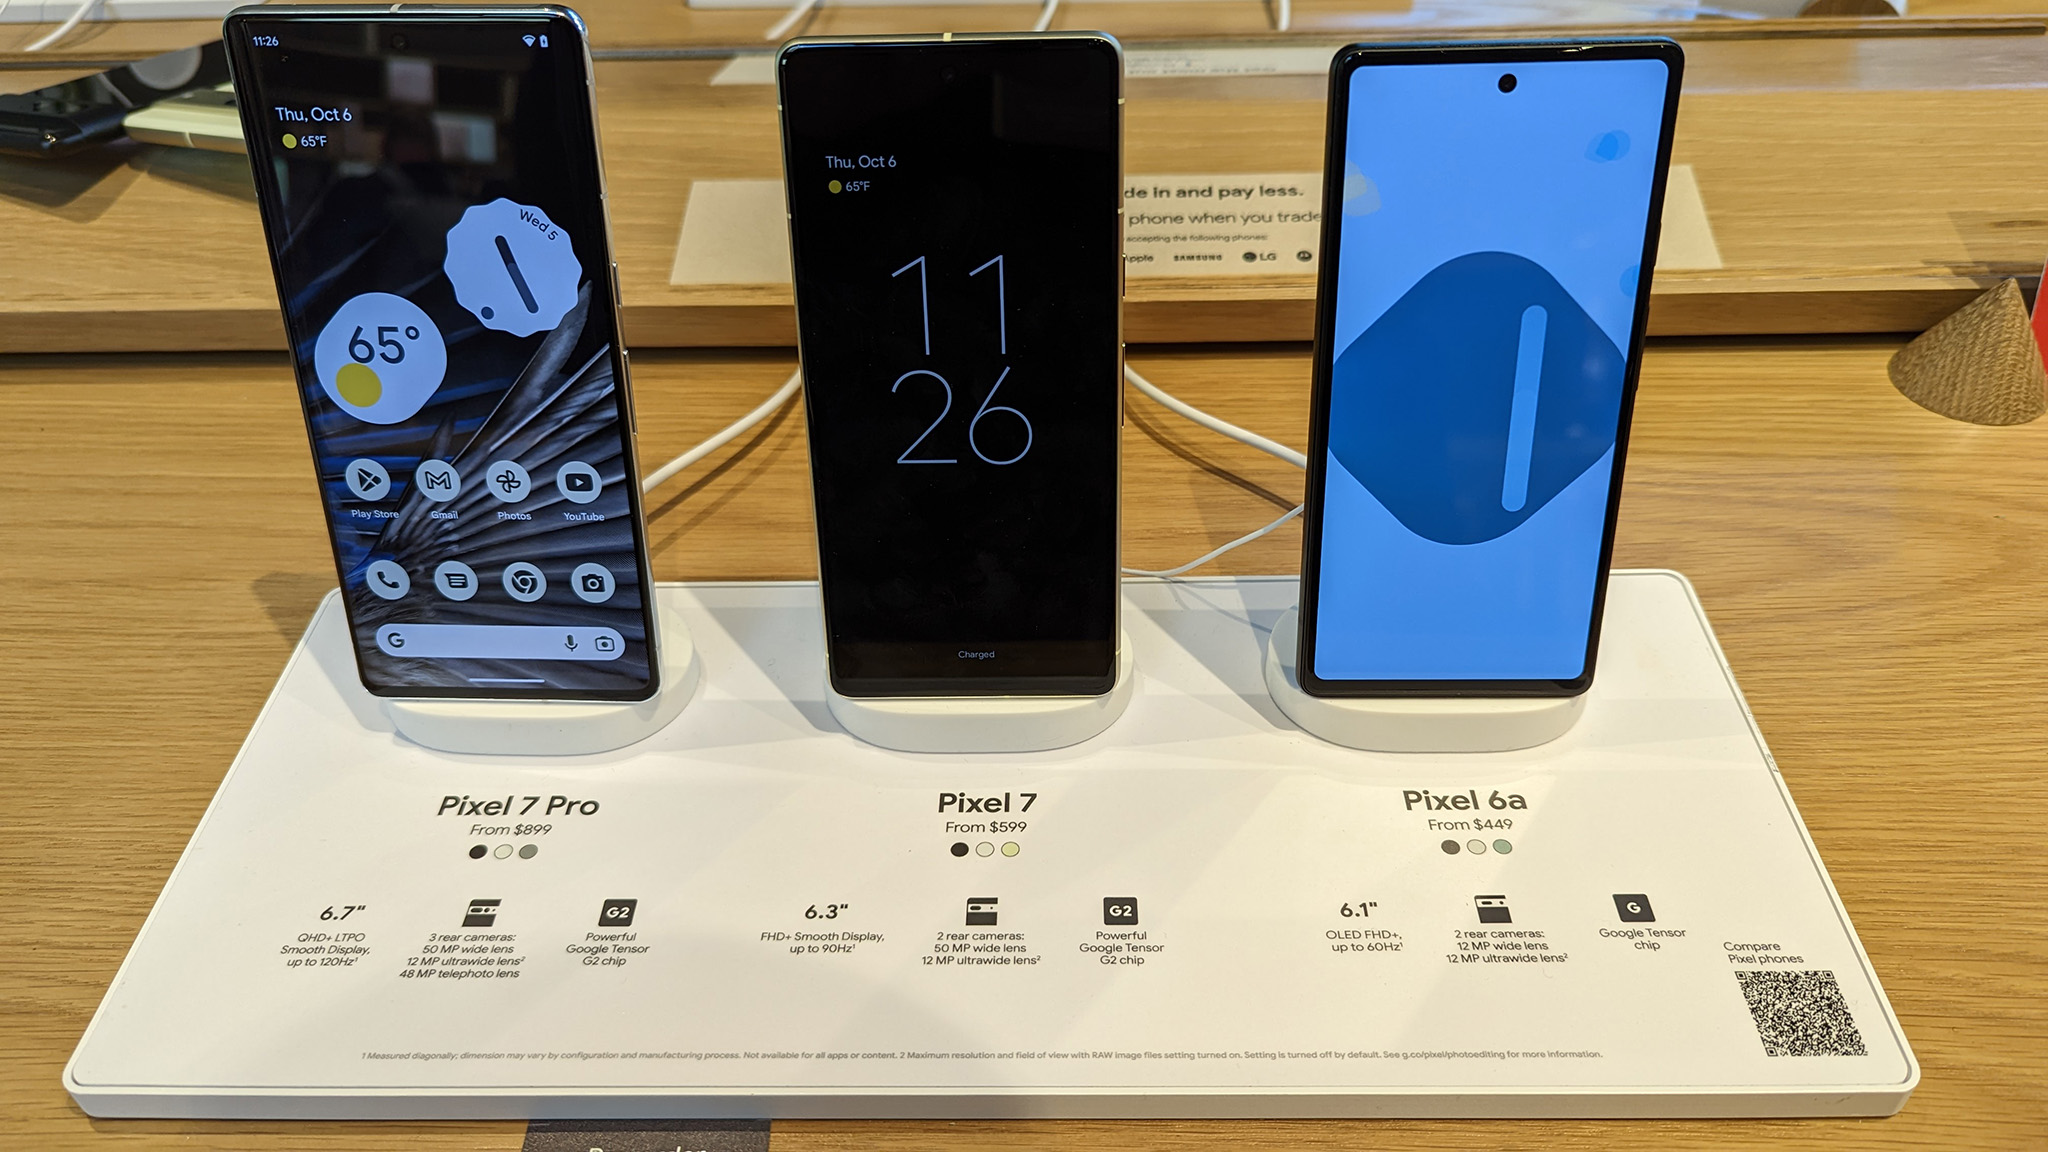 Google Pixel 7, 7 Pro and 6a at the Google Fall 2022 event